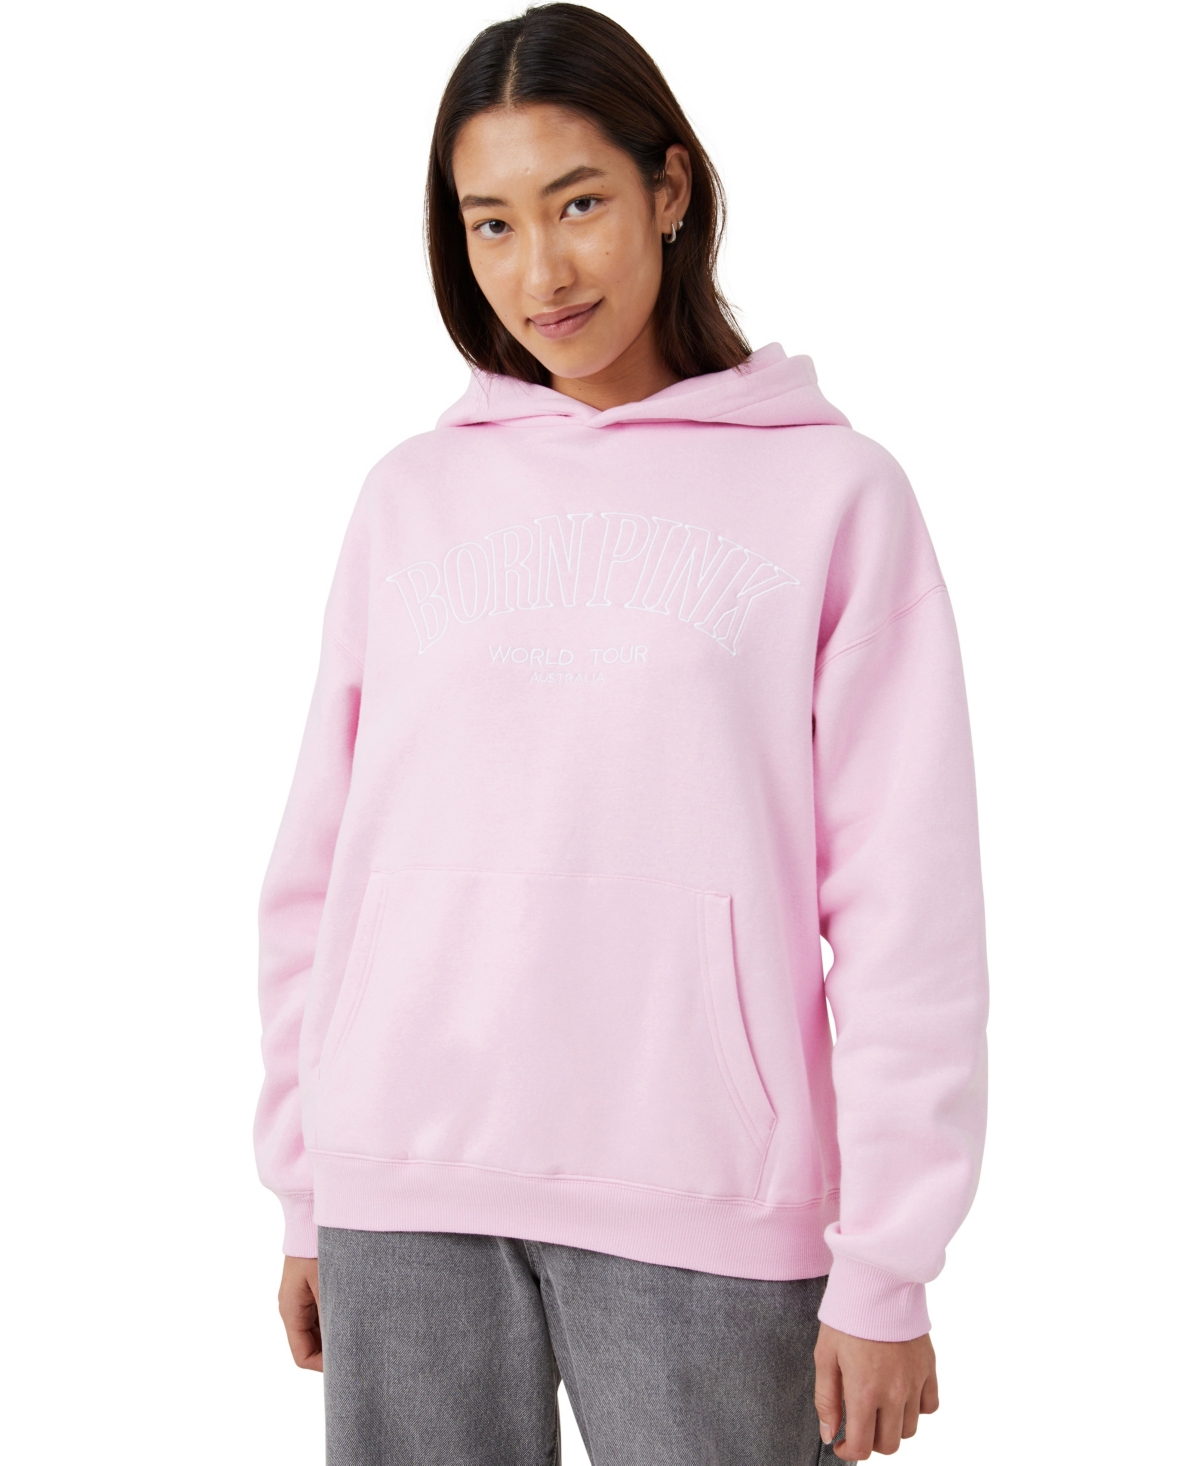 Women's Hoodie Sweater - Black Pink Born Pink, Candy Pink